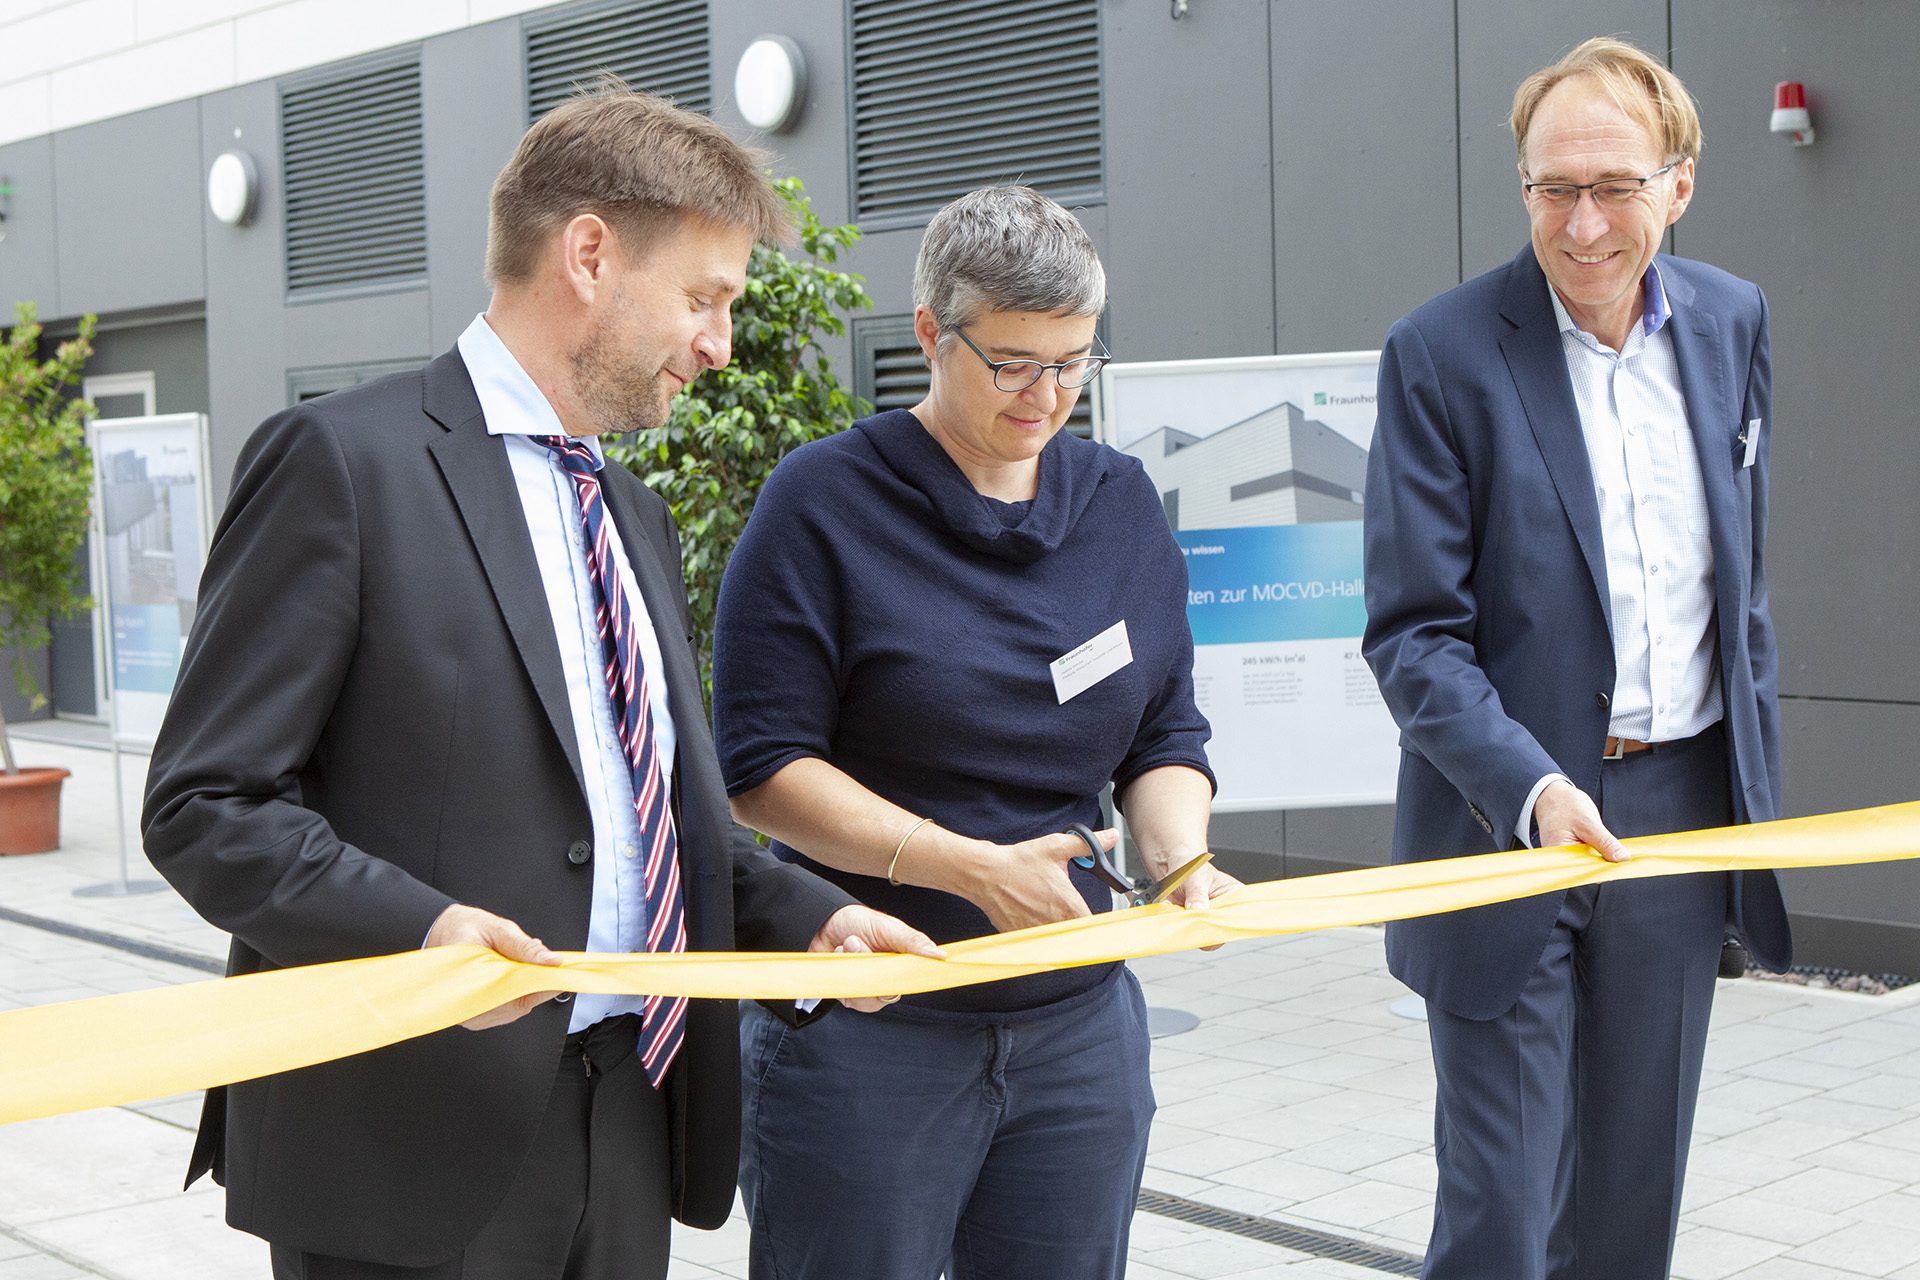 Two men and a woman ceremoniously cut a golden ribbon at the building inauguration of the new buildings at Fraunhofer IAF.